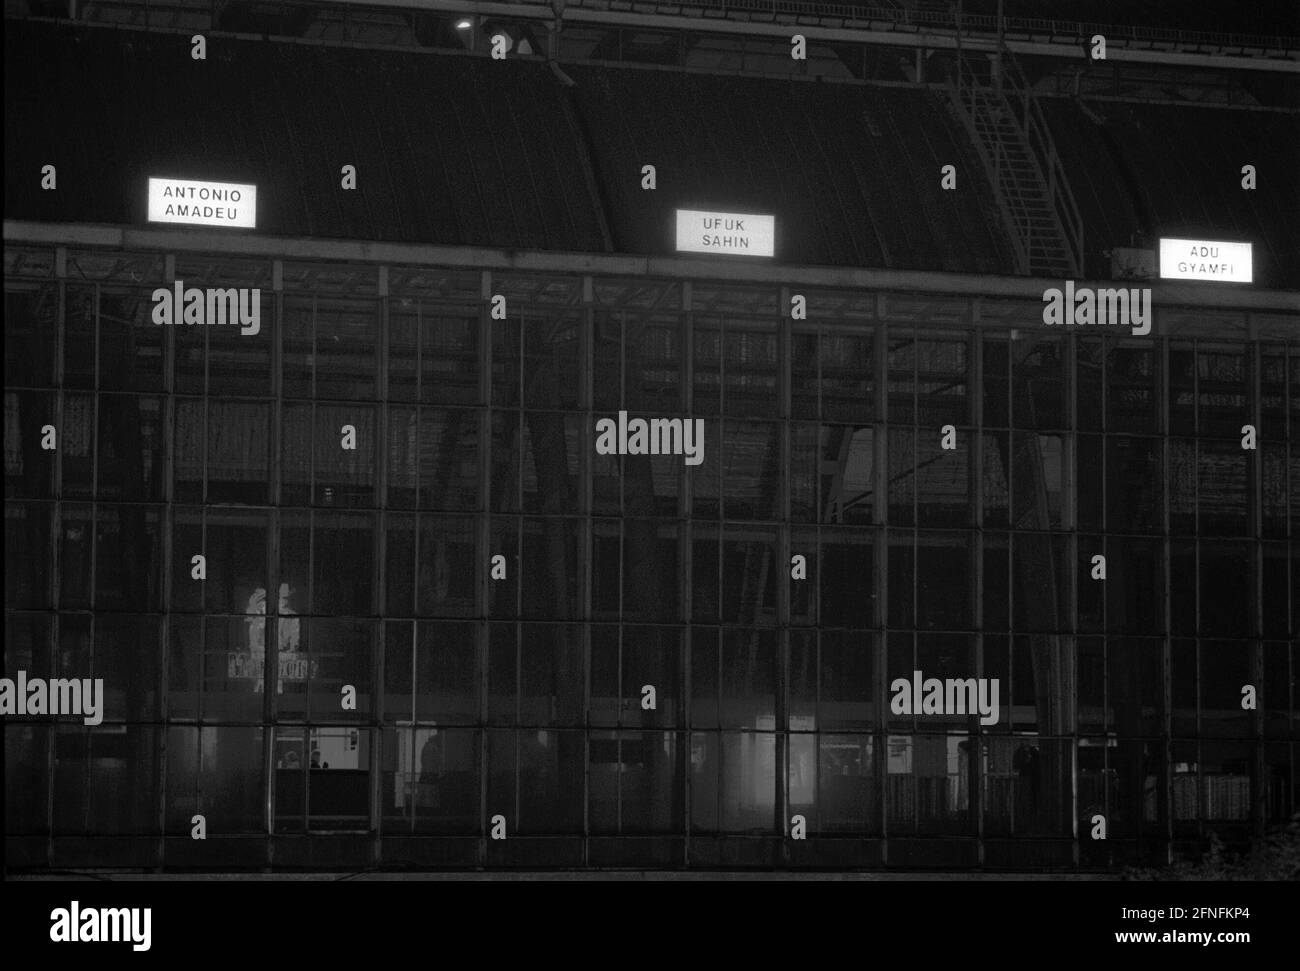 Art action at Alexanderplatz station, illuminated names of foreigners murdered by neo-Nazis in Germany, Antonio Amadeu, Berlin-Mitte, 03.02.1991, [automated translation] Stock Photo